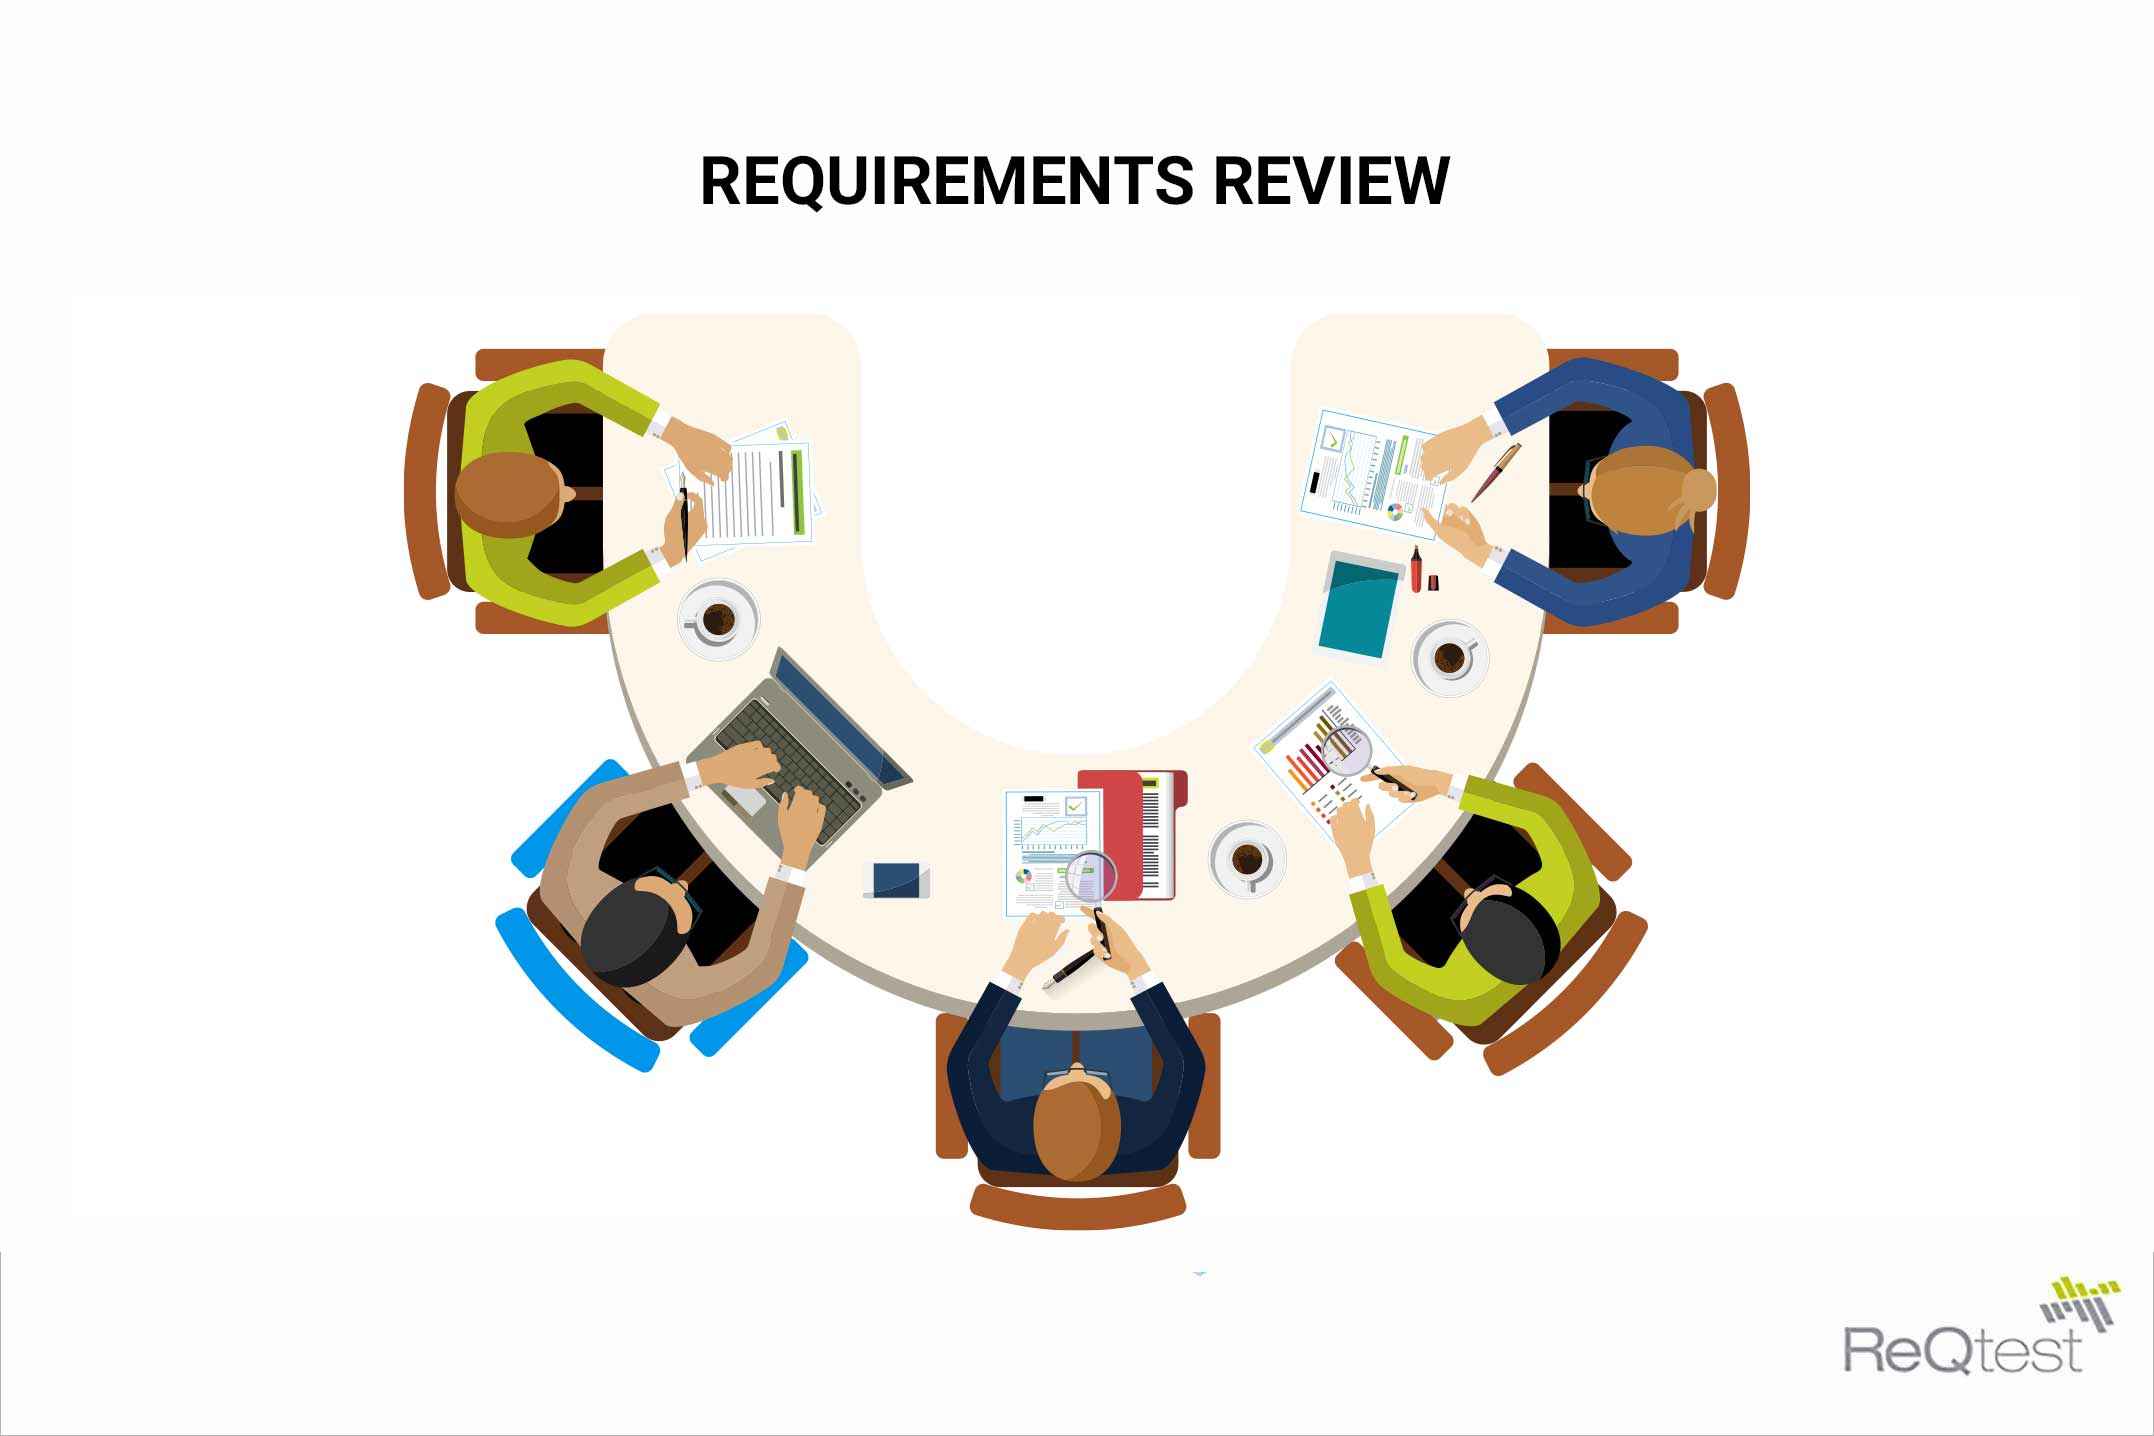 Requirment review